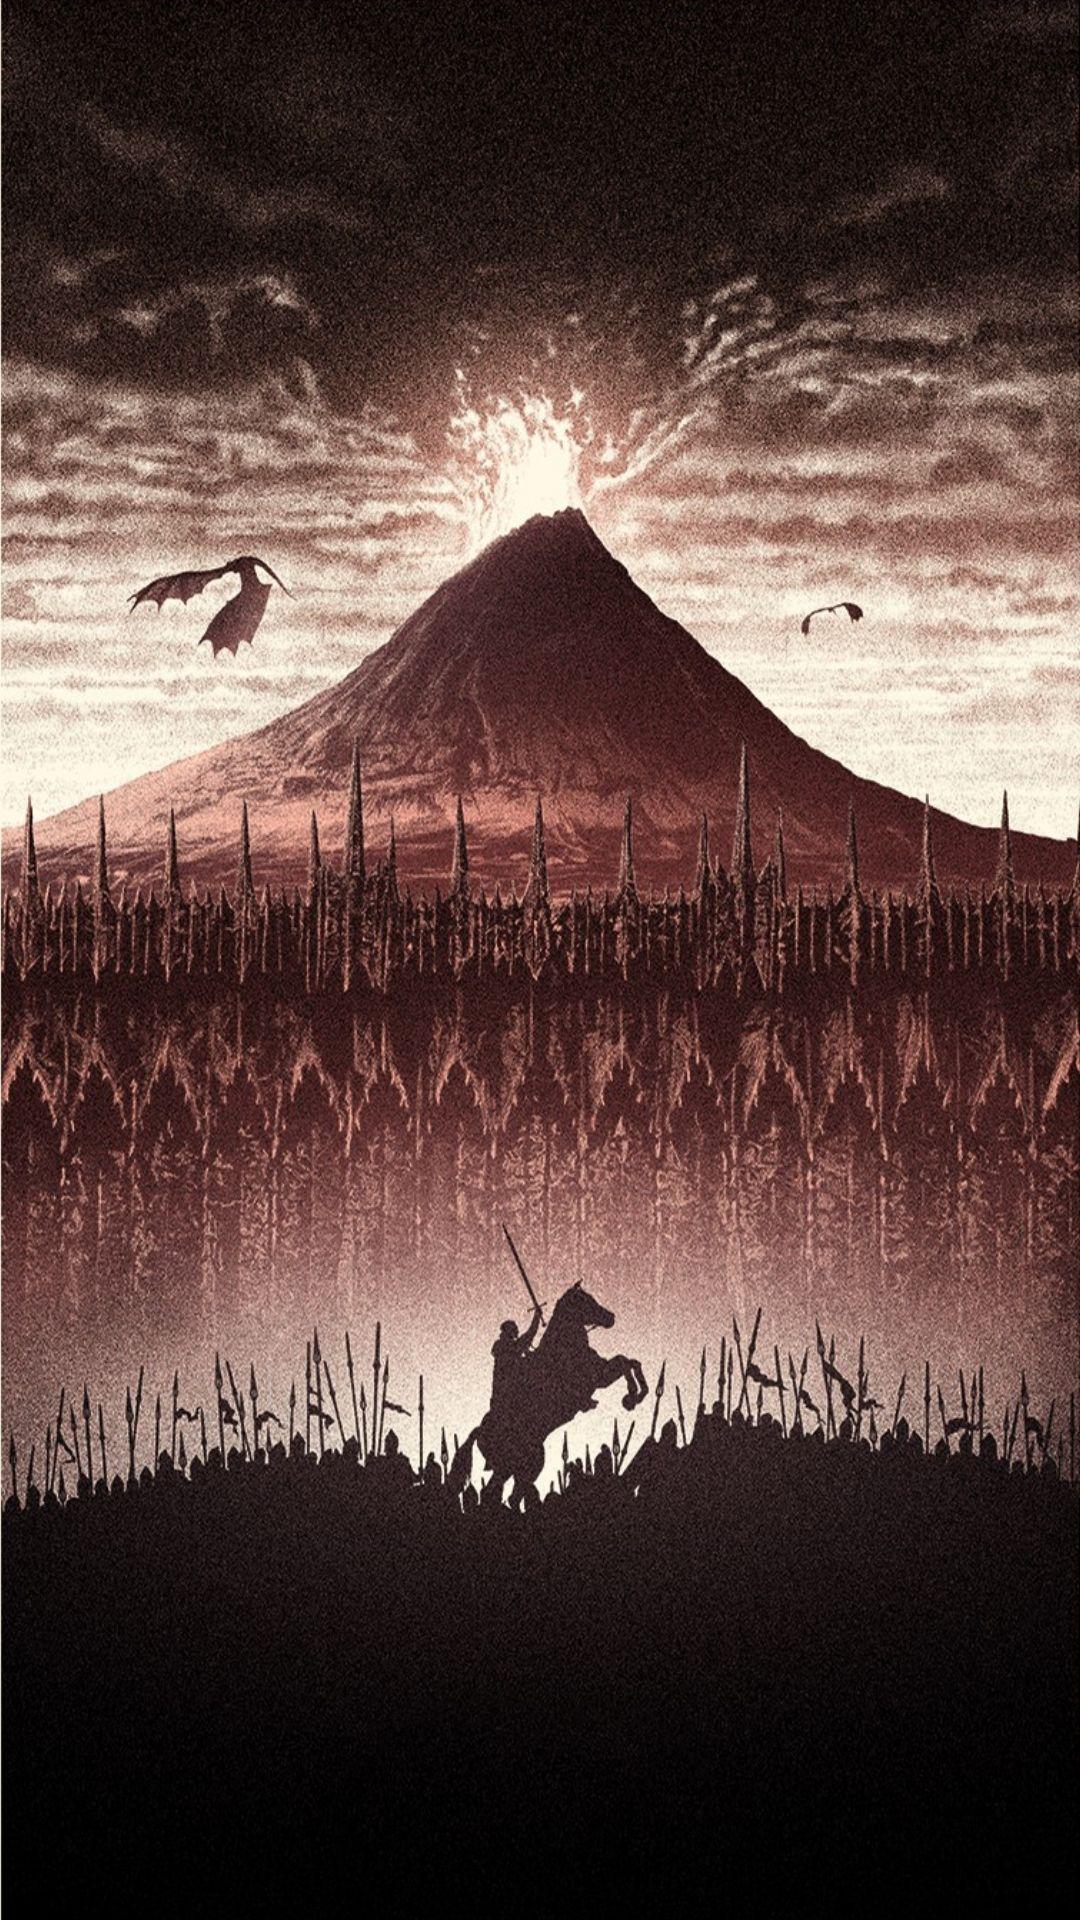 Lord of the Rings iPhone Wallpaper Free Lord of the Rings iPhone Background